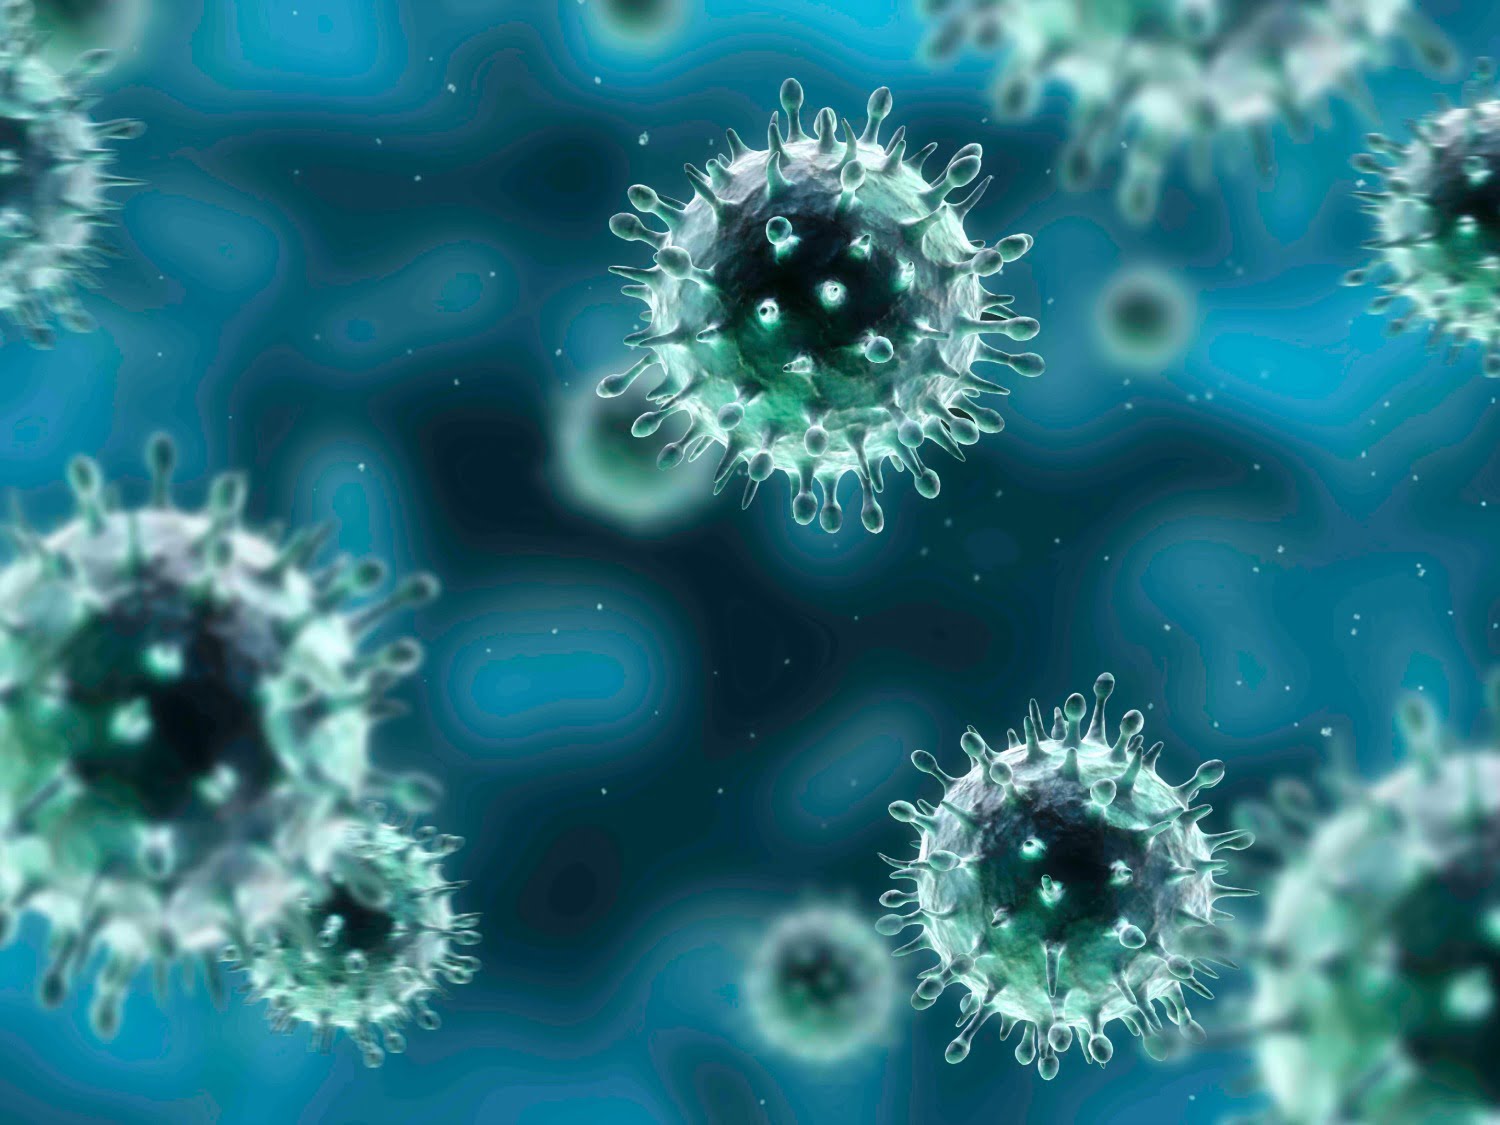 flu vaccination: the virus close-up in blue